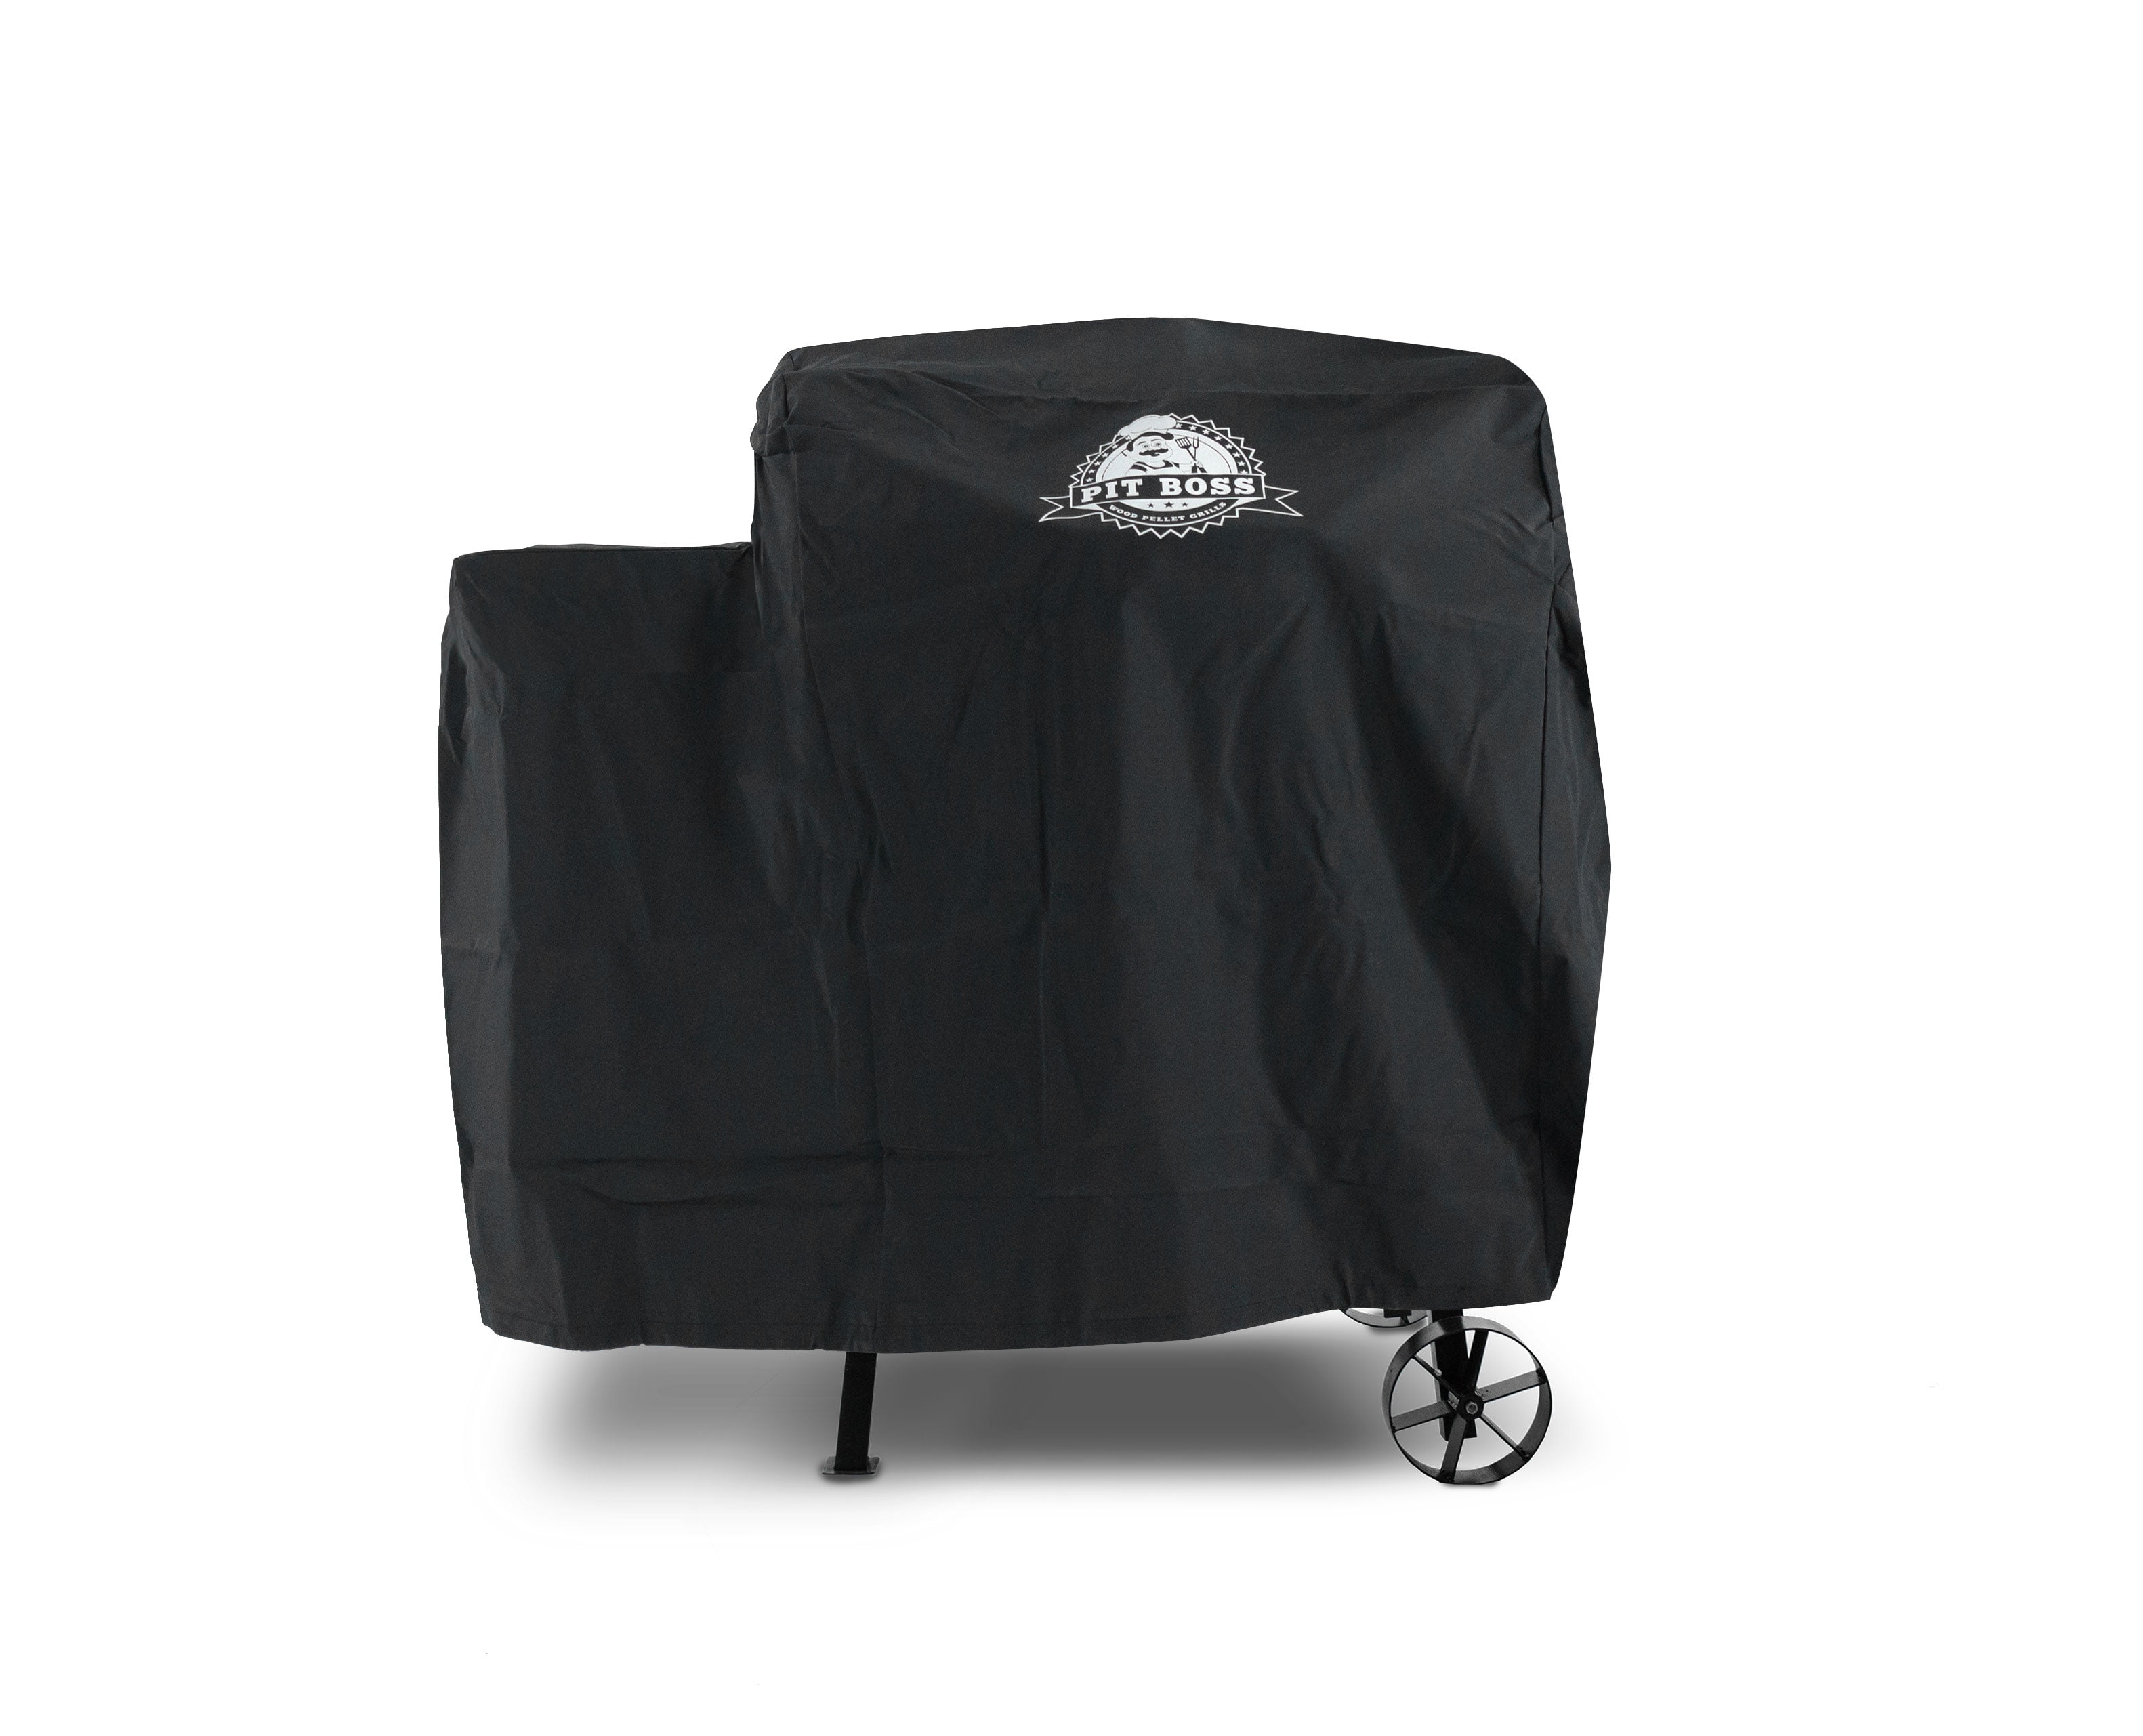 pit boss pellet grill cover